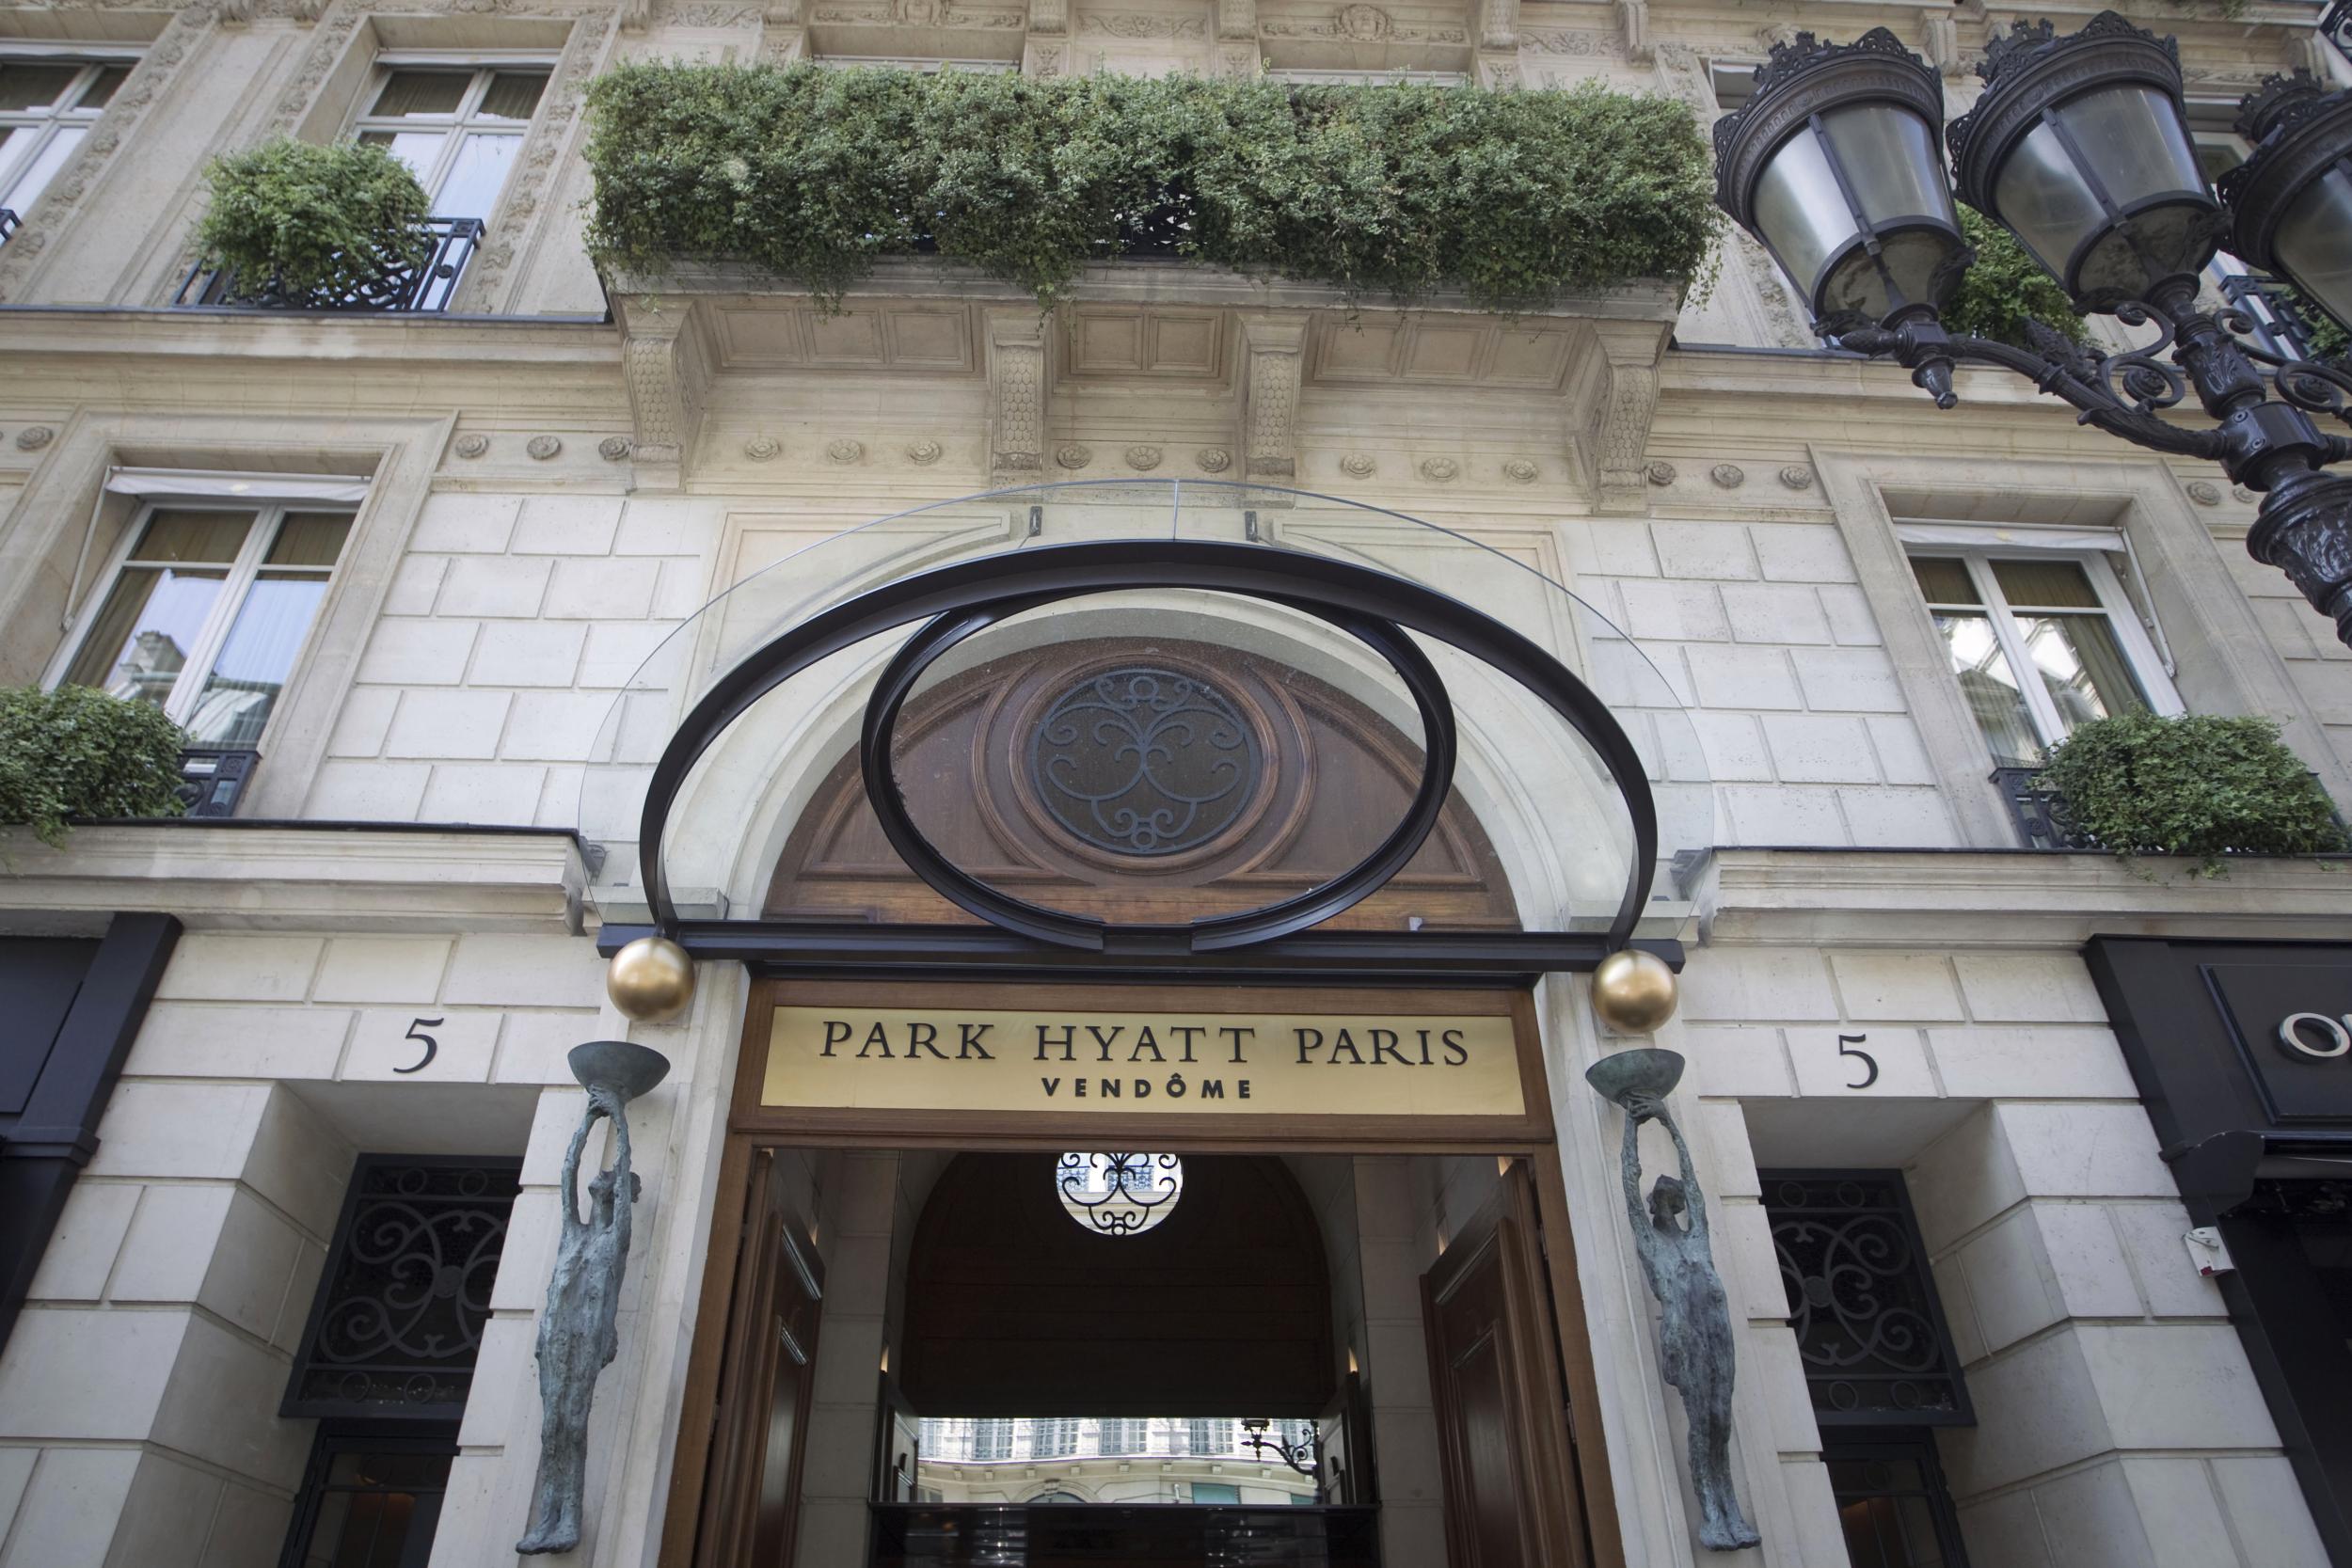 The Park Hyatt says it is in “total disagreement” with the ruling and will appeal